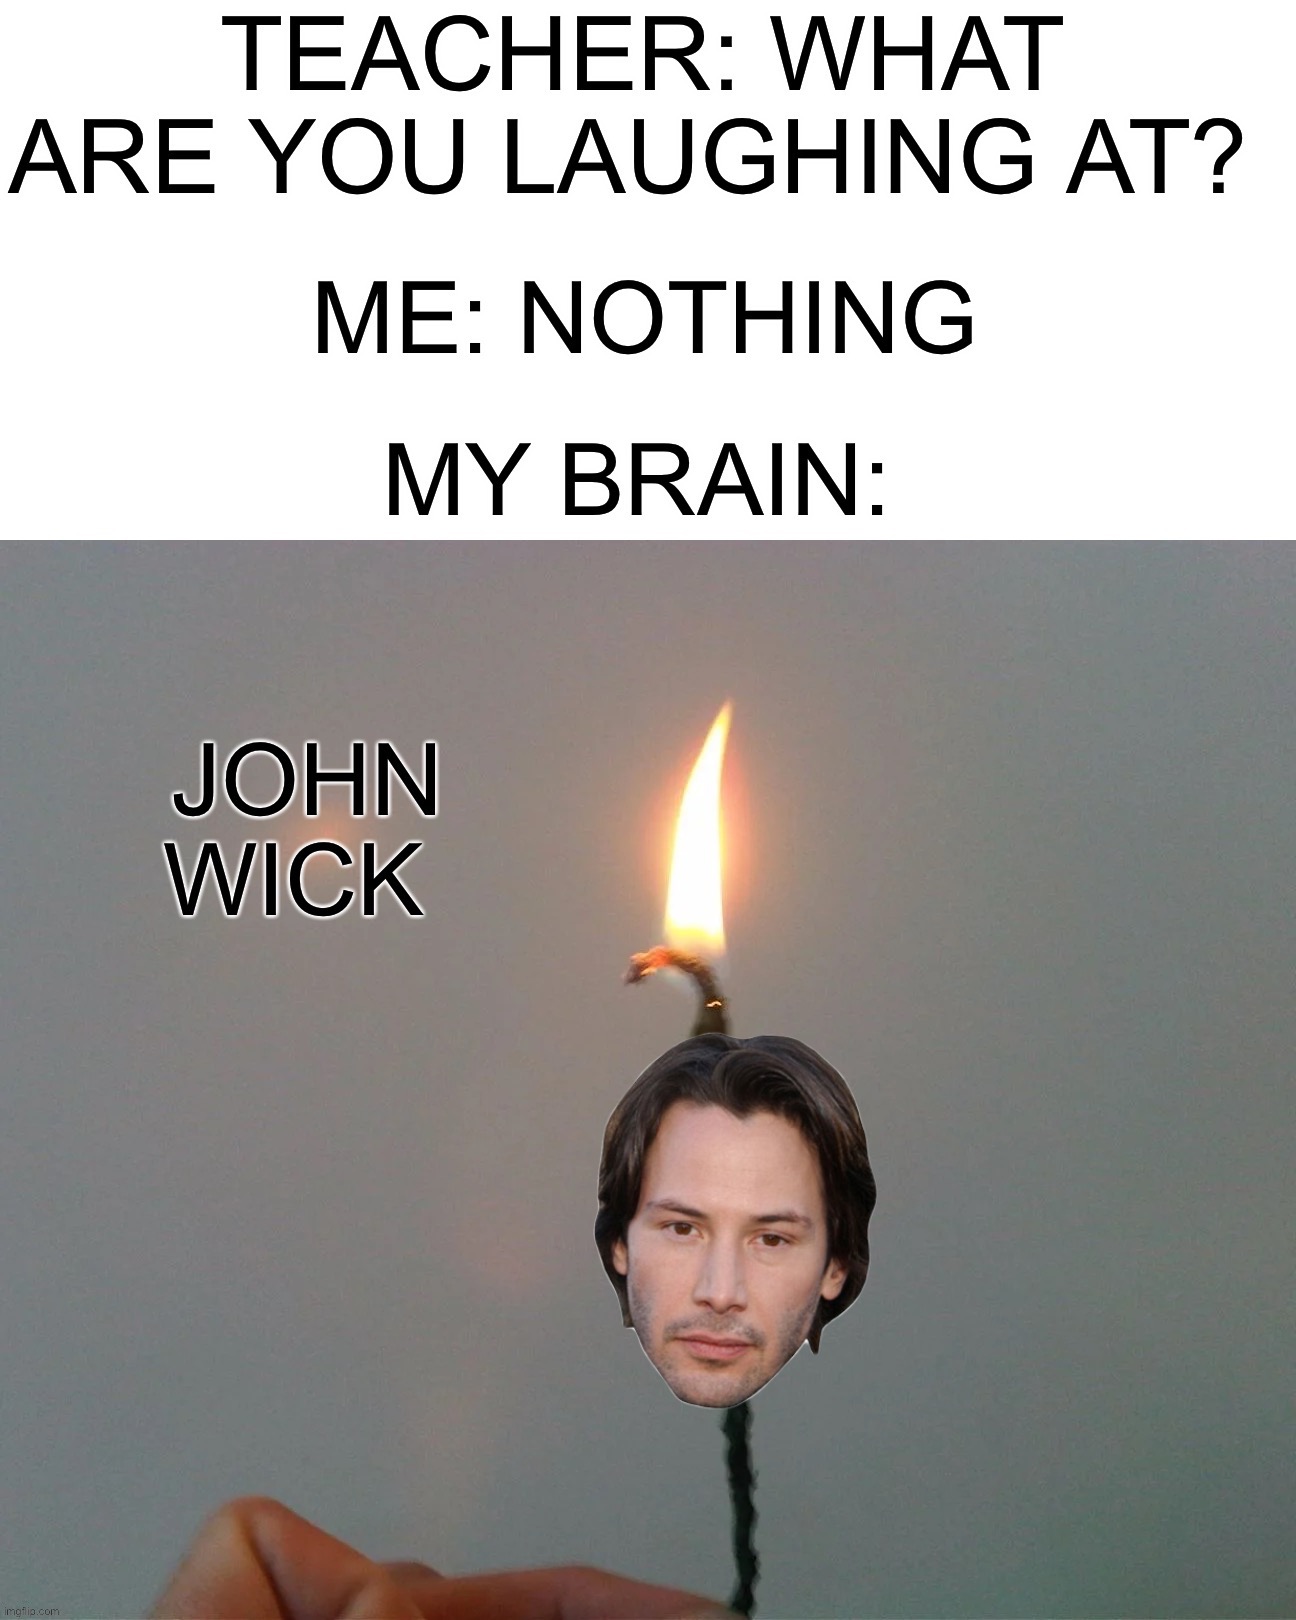 John the Candle Wick | image tagged in memes,funny,teacher what are you laughing at,nothing,my brain,lmao | made w/ Imgflip meme maker